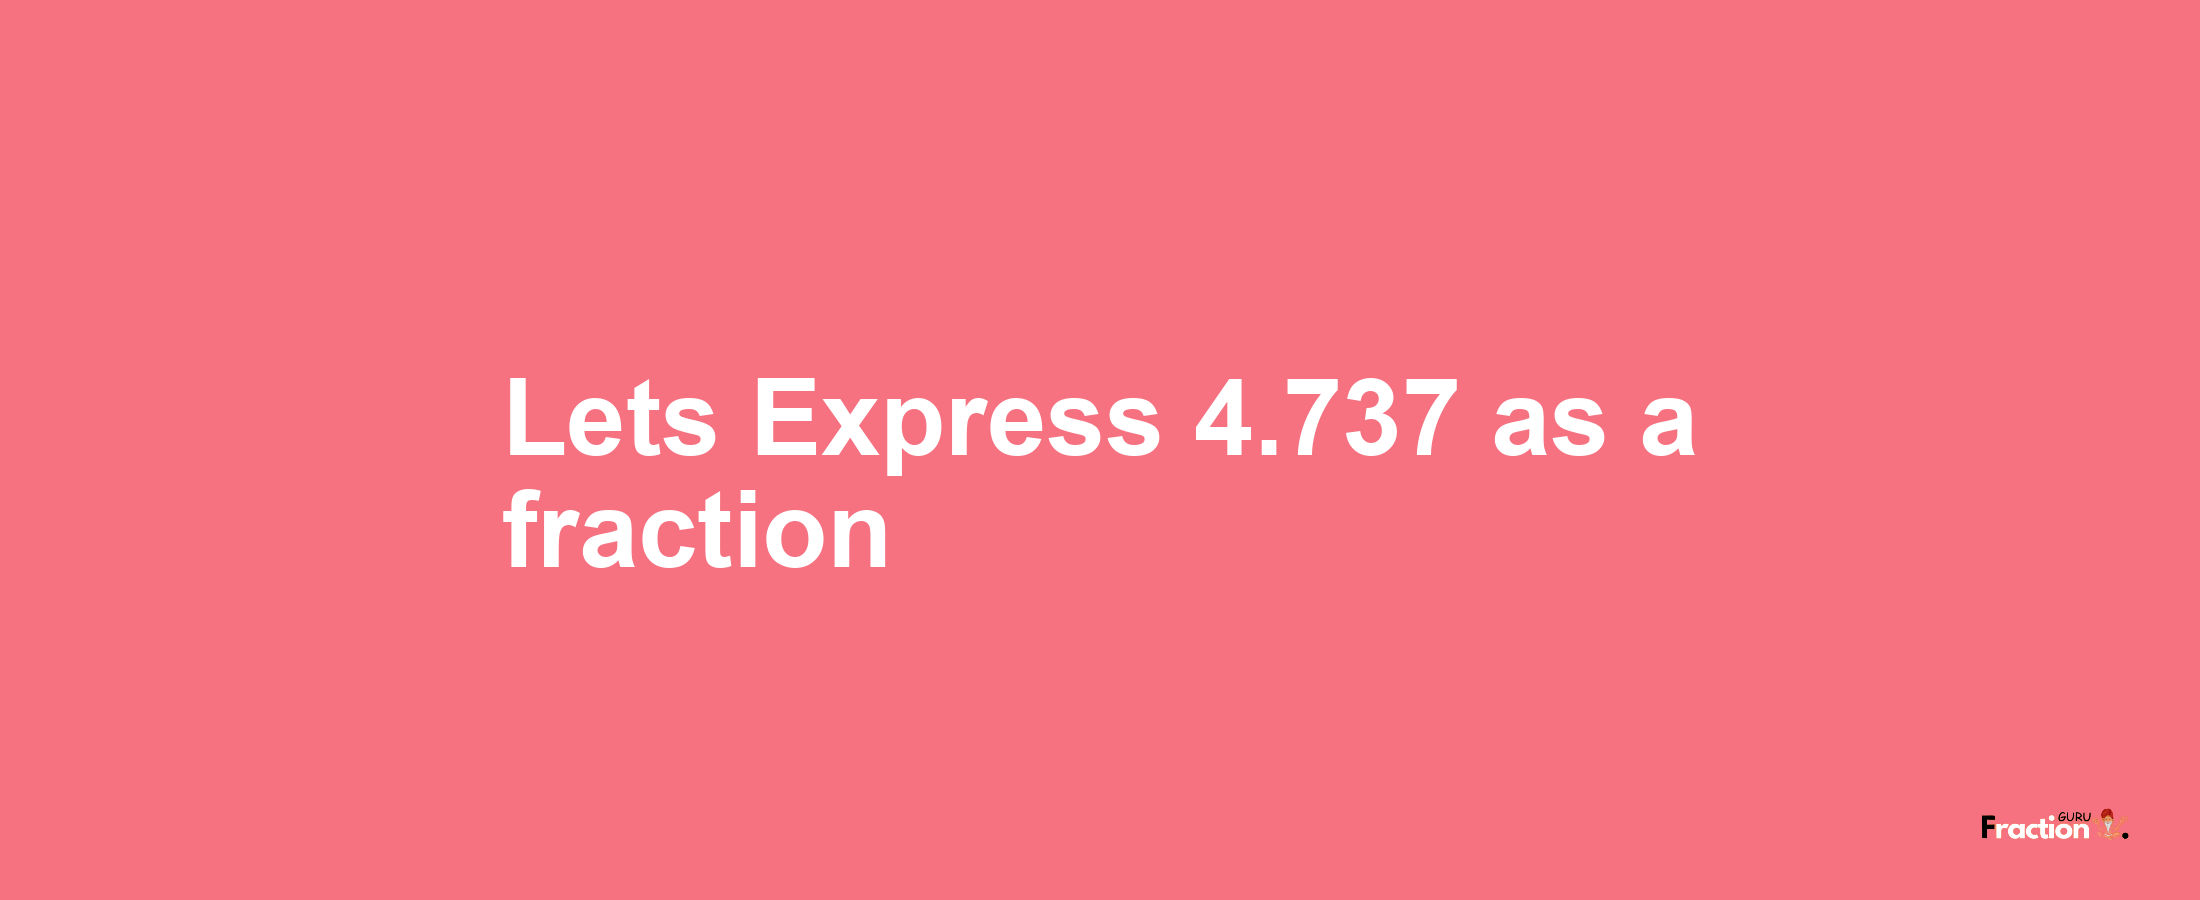 Lets Express 4.737 as afraction